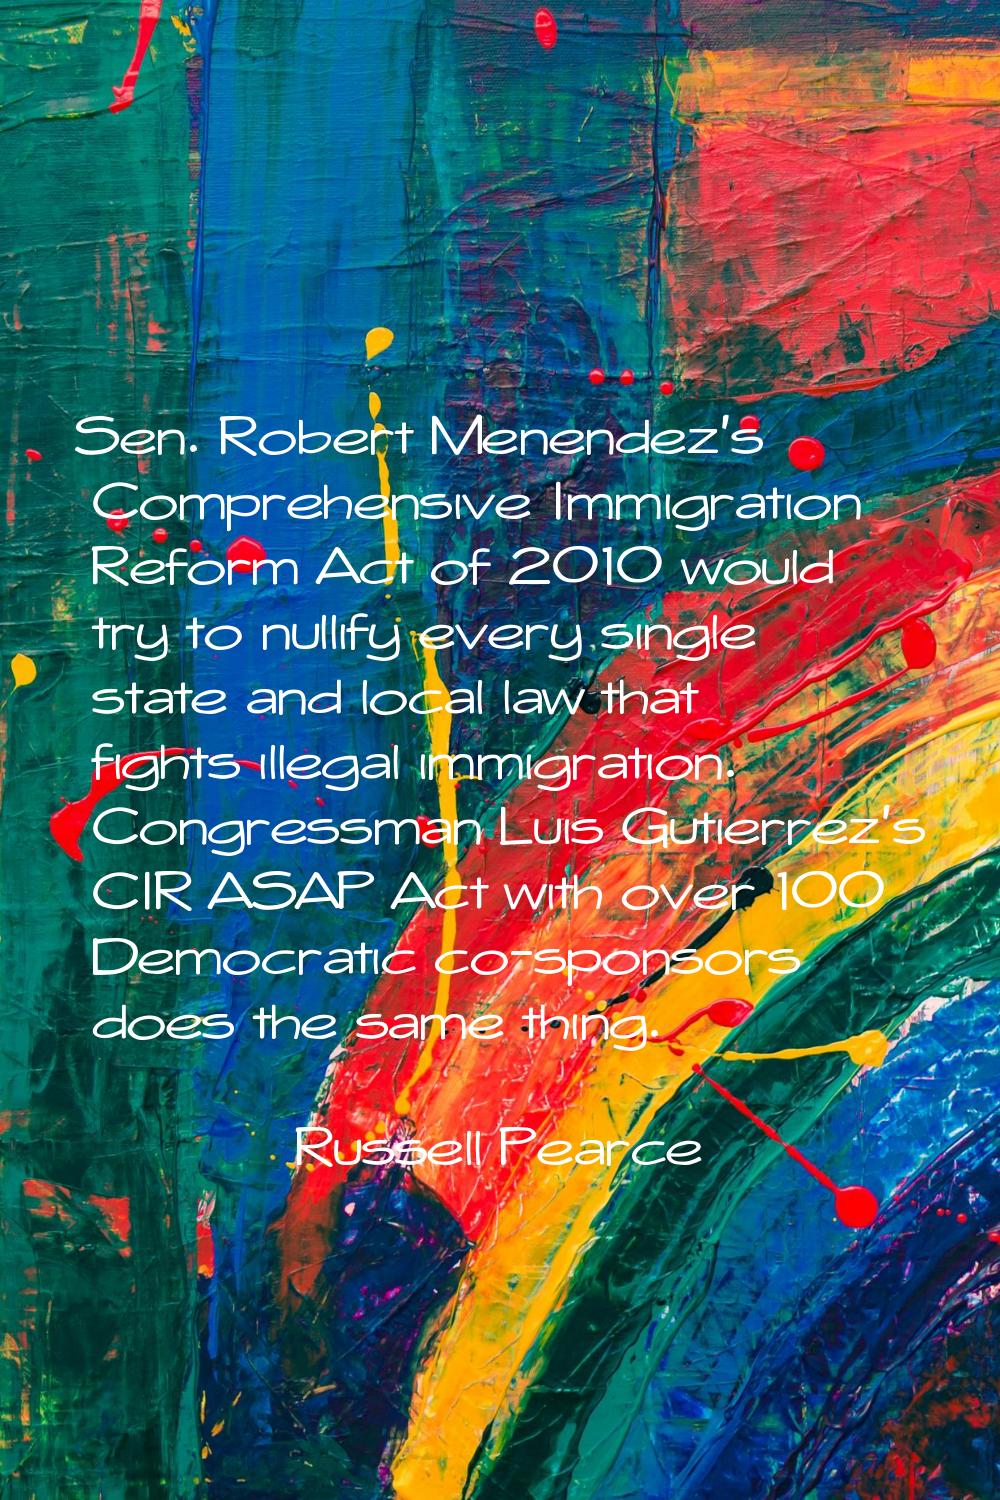 Sen. Robert Menendez's Comprehensive Immigration Reform Act of 2010 would try to nullify every sing